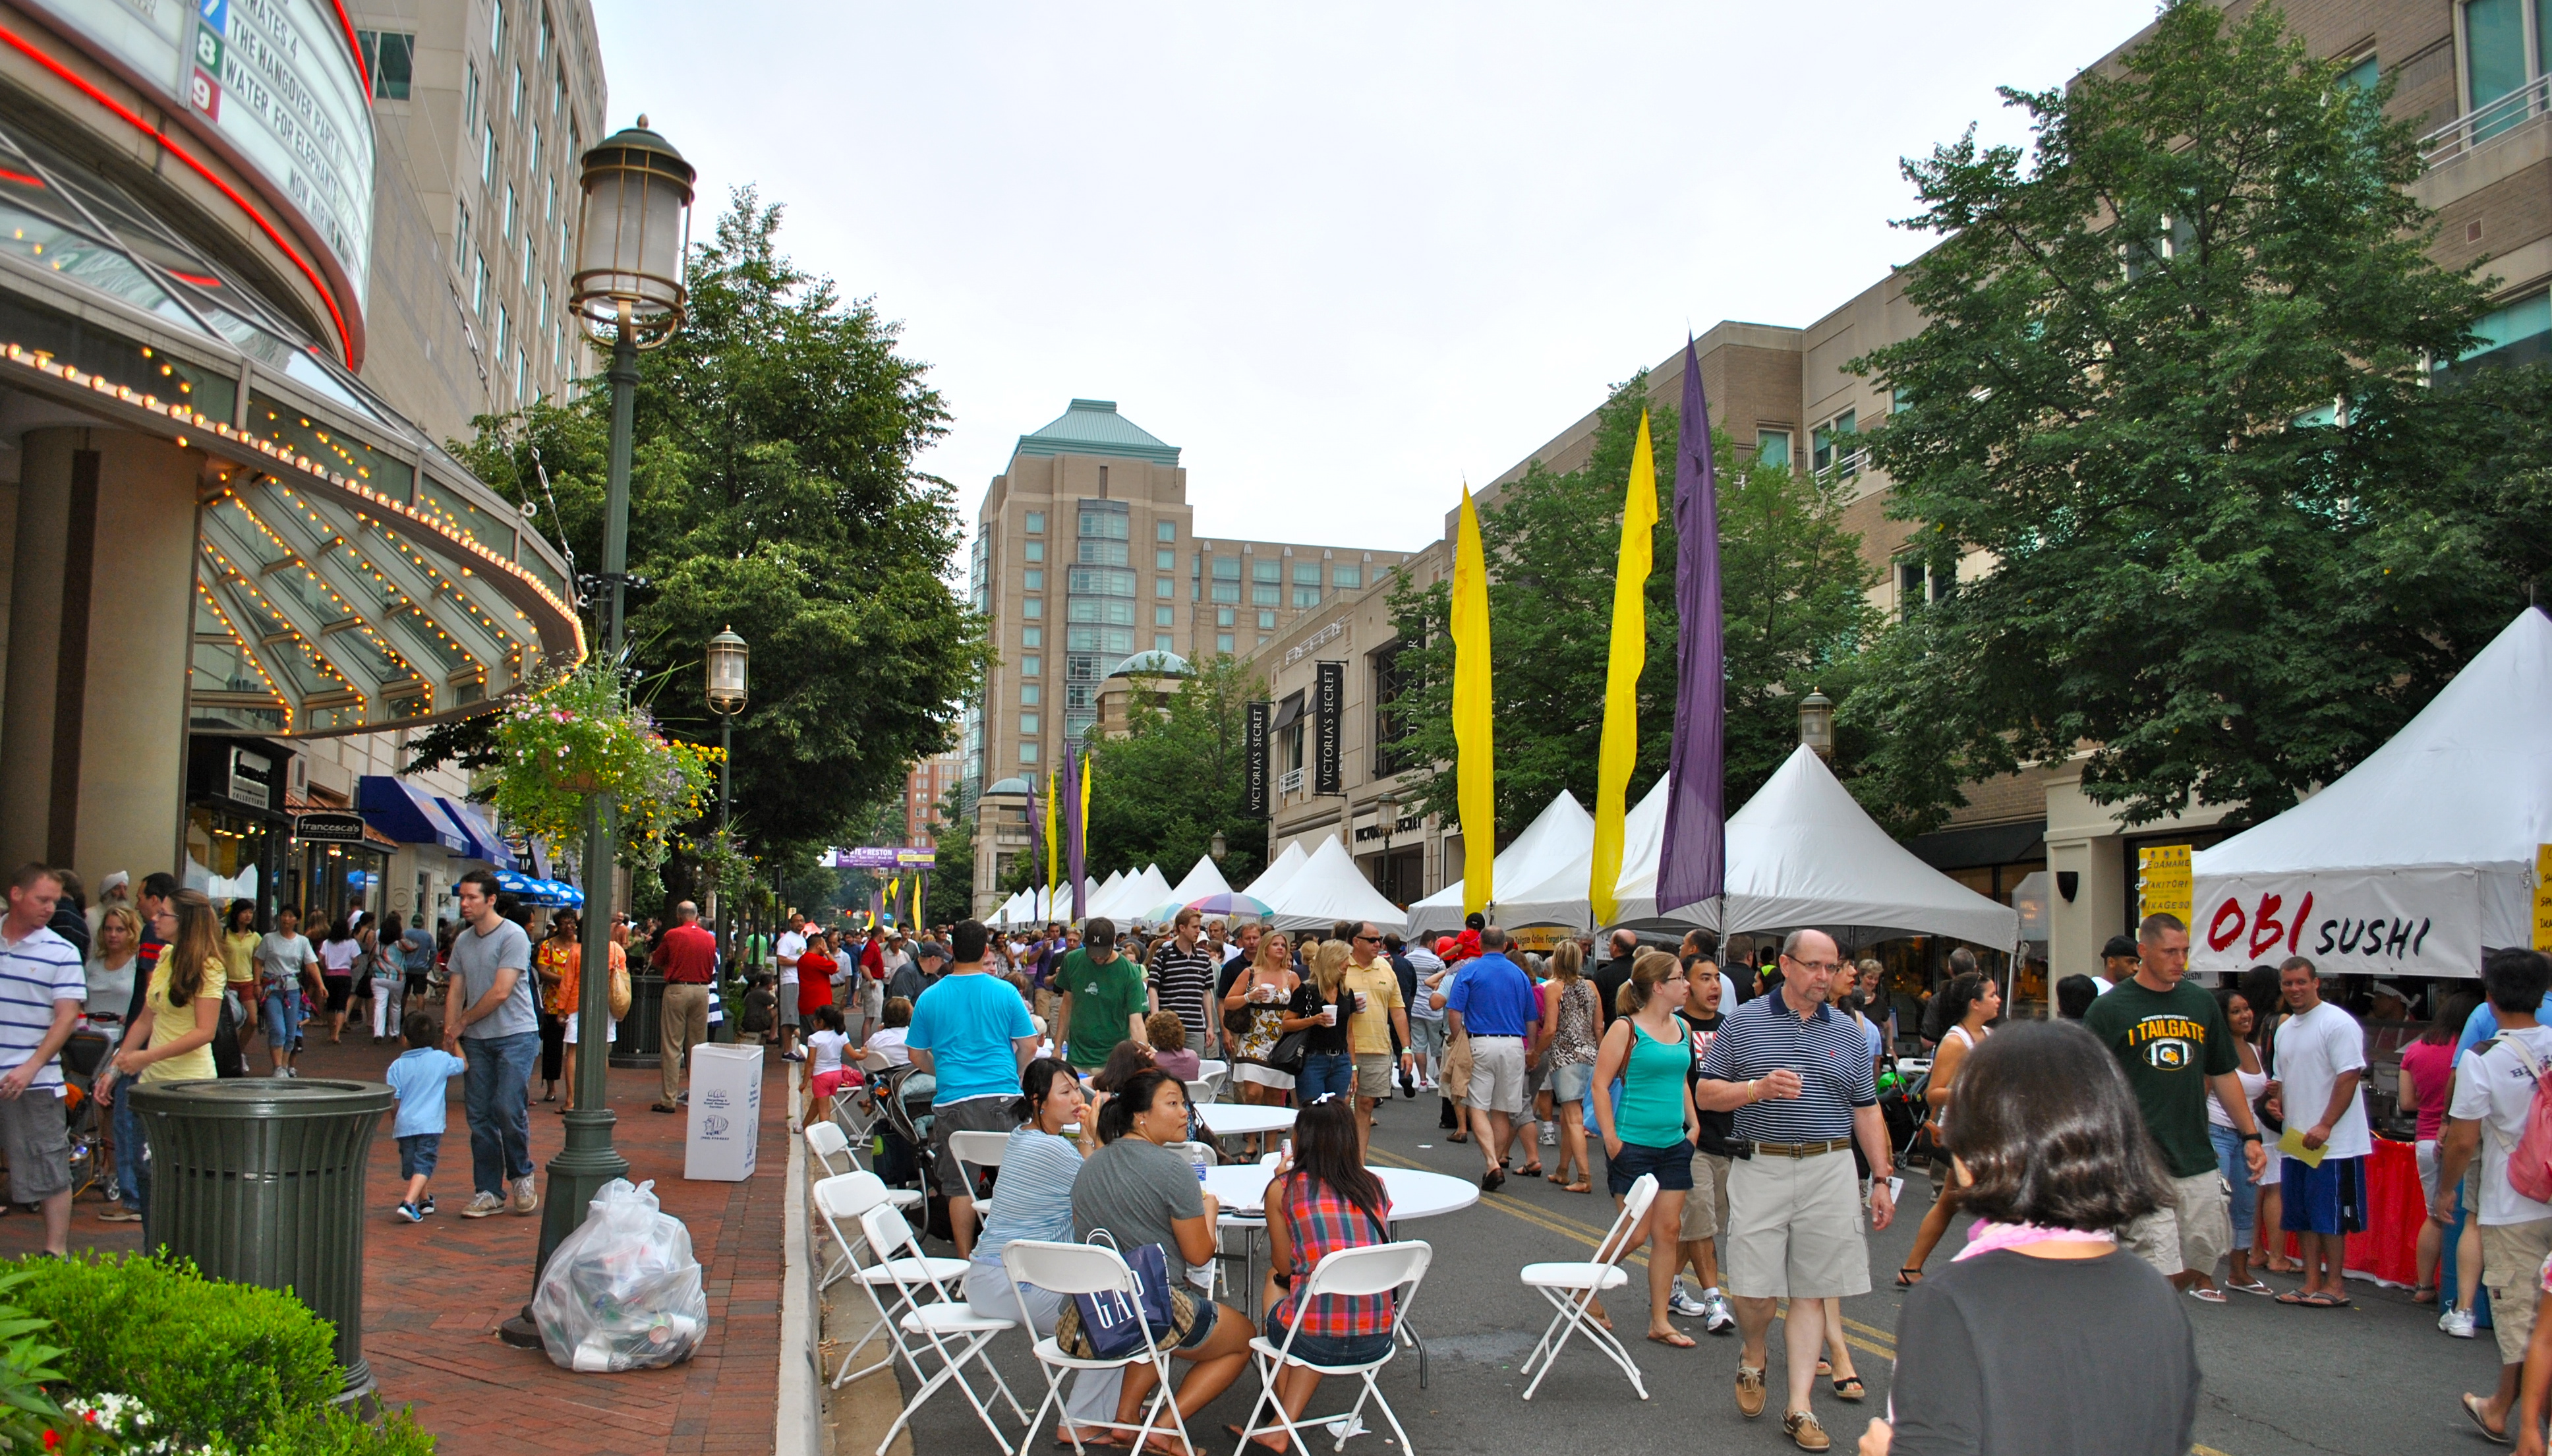 The three-day Taste of Reston food fest and carnival comes to Reston Town Center this weekend. (Photo: Reston Town Center)